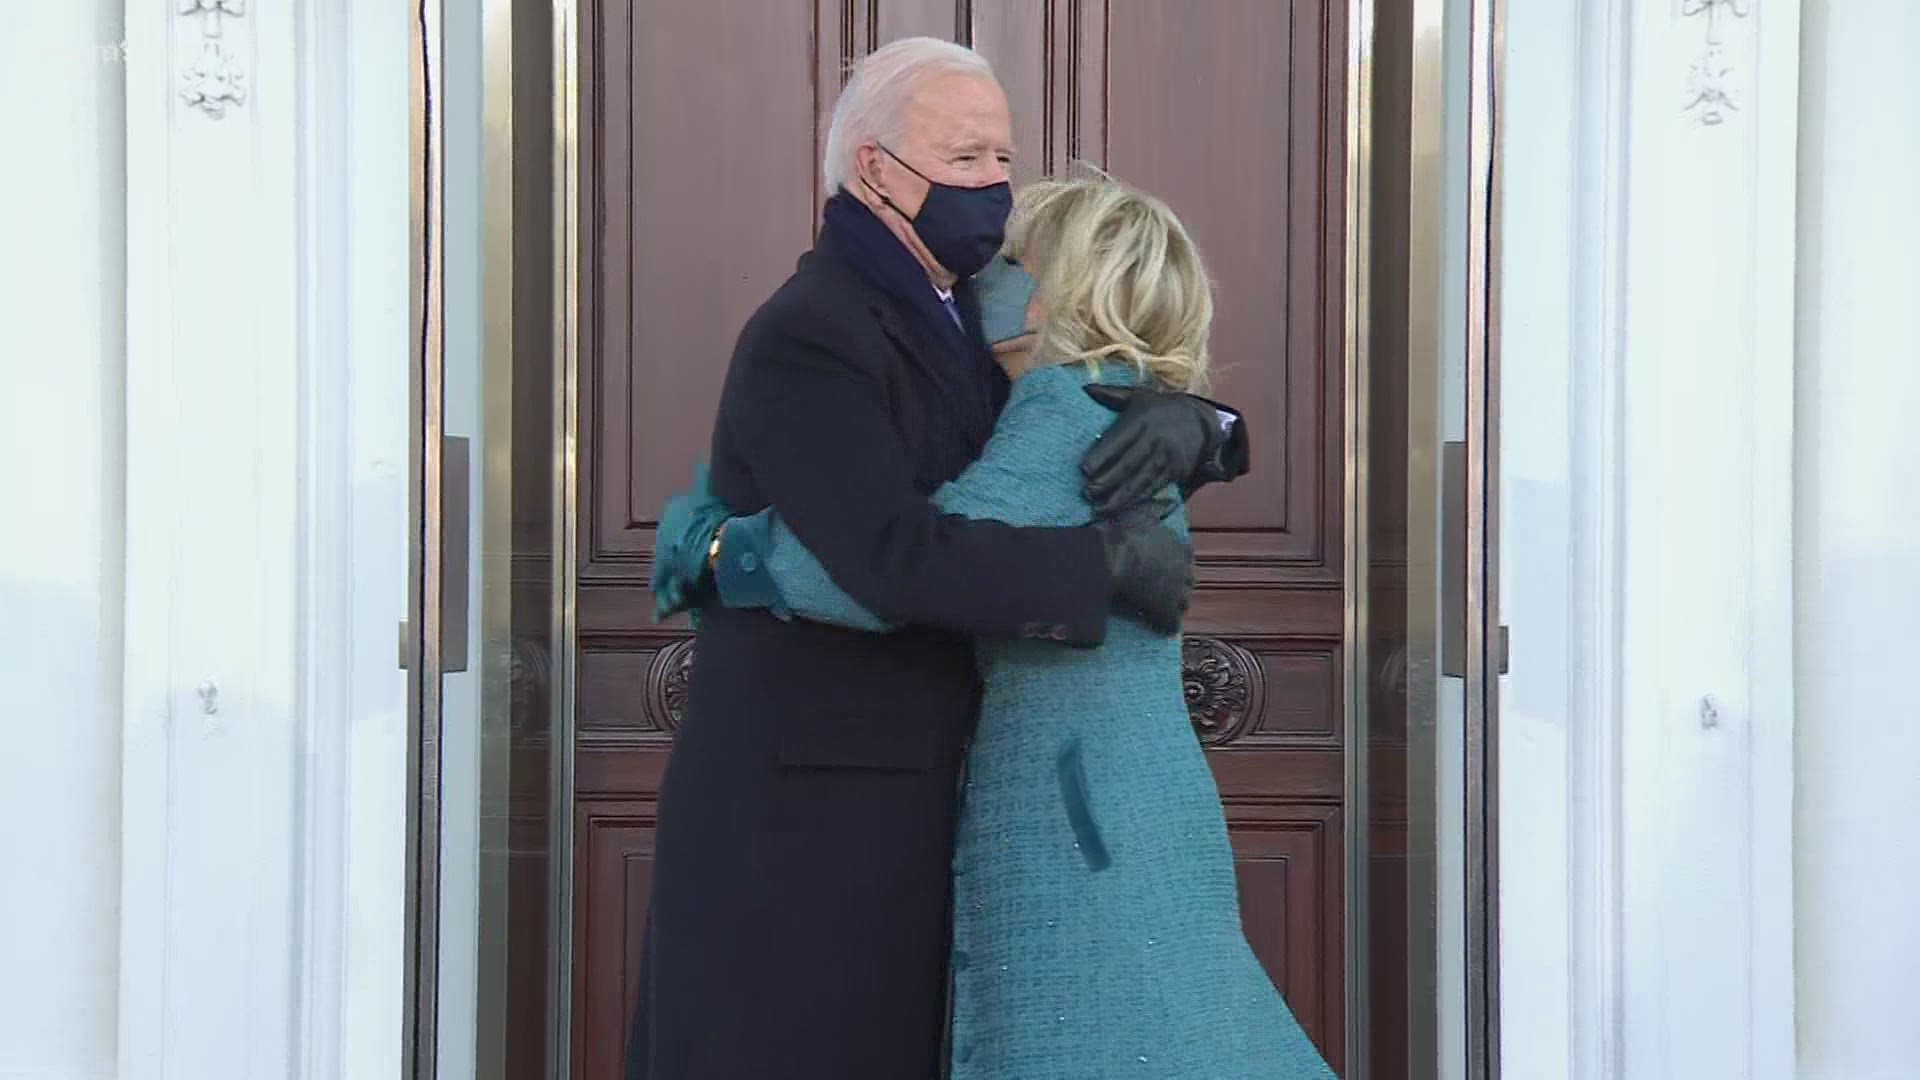 President Joe Biden enters into the White House with wife Jill Biden and family members on Inauguration Day.